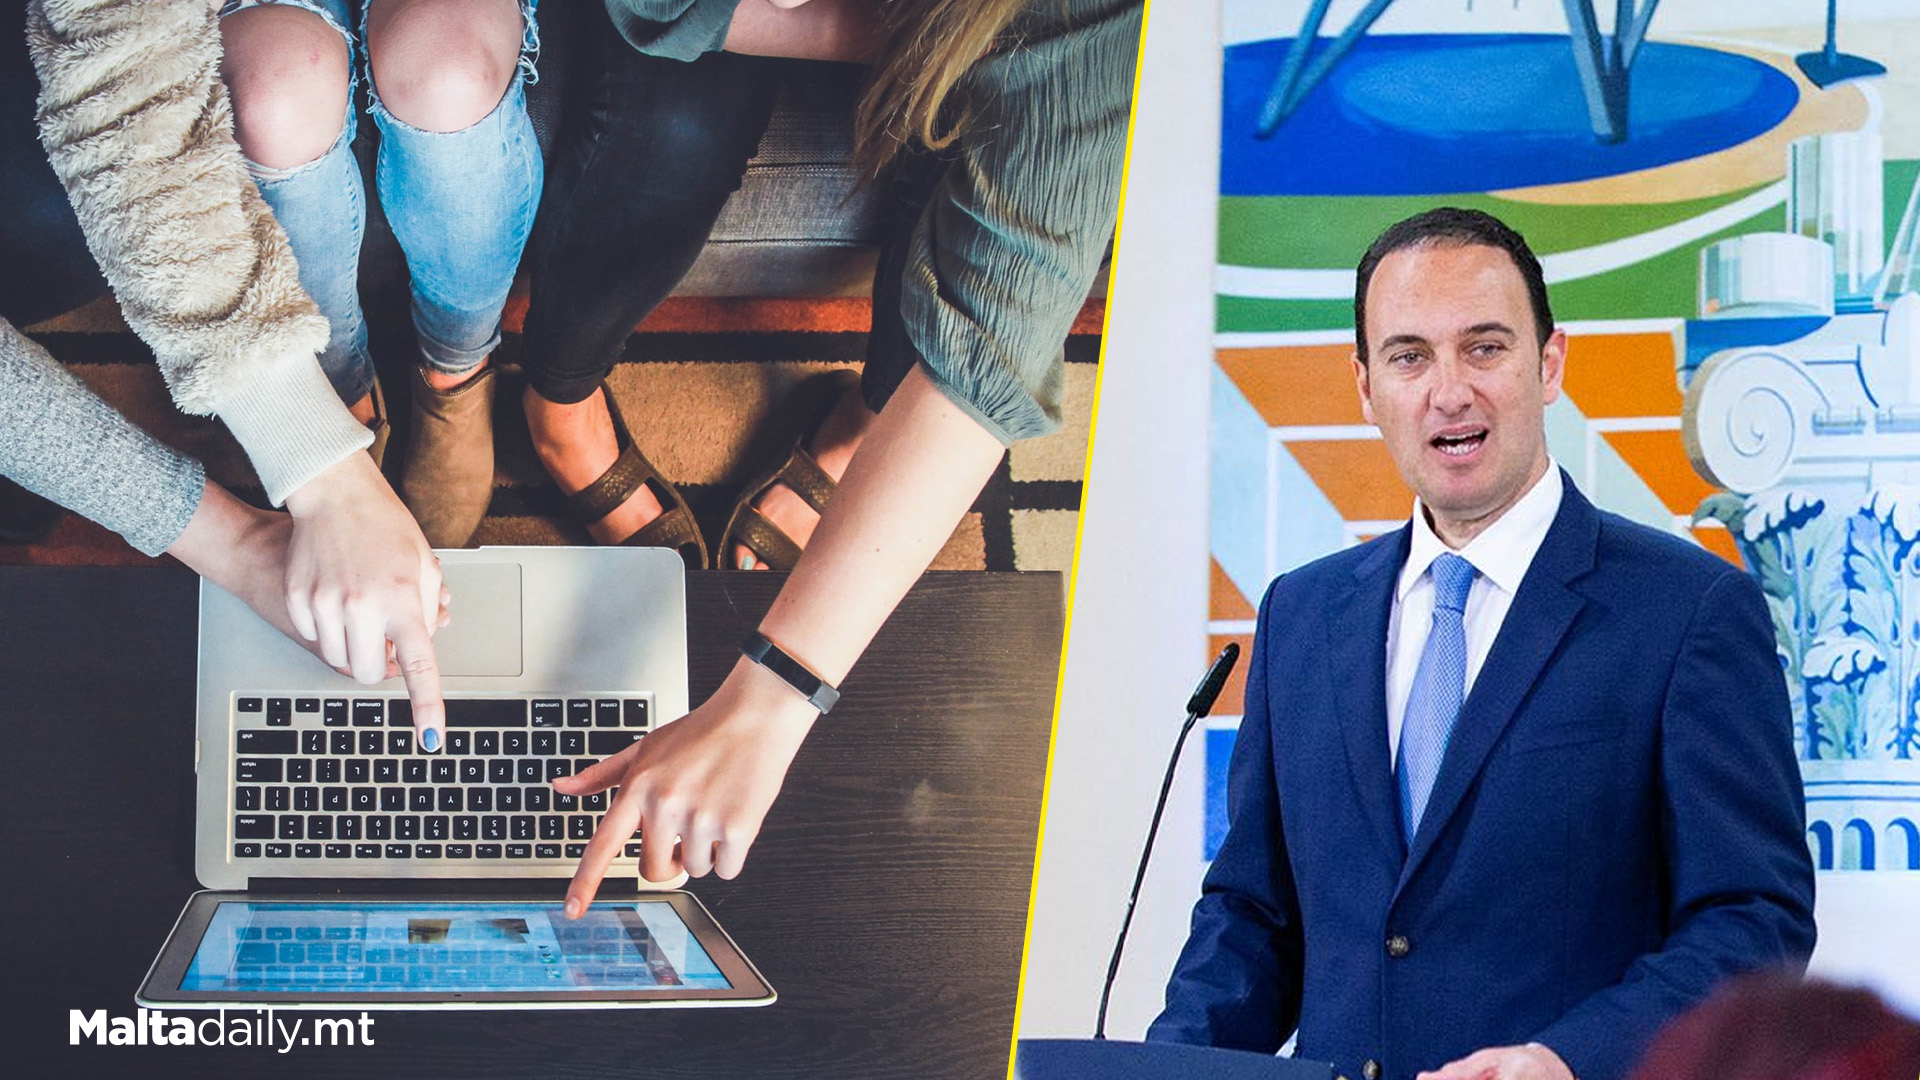 Over 3,200 Maltese Students To Receive Free Internet